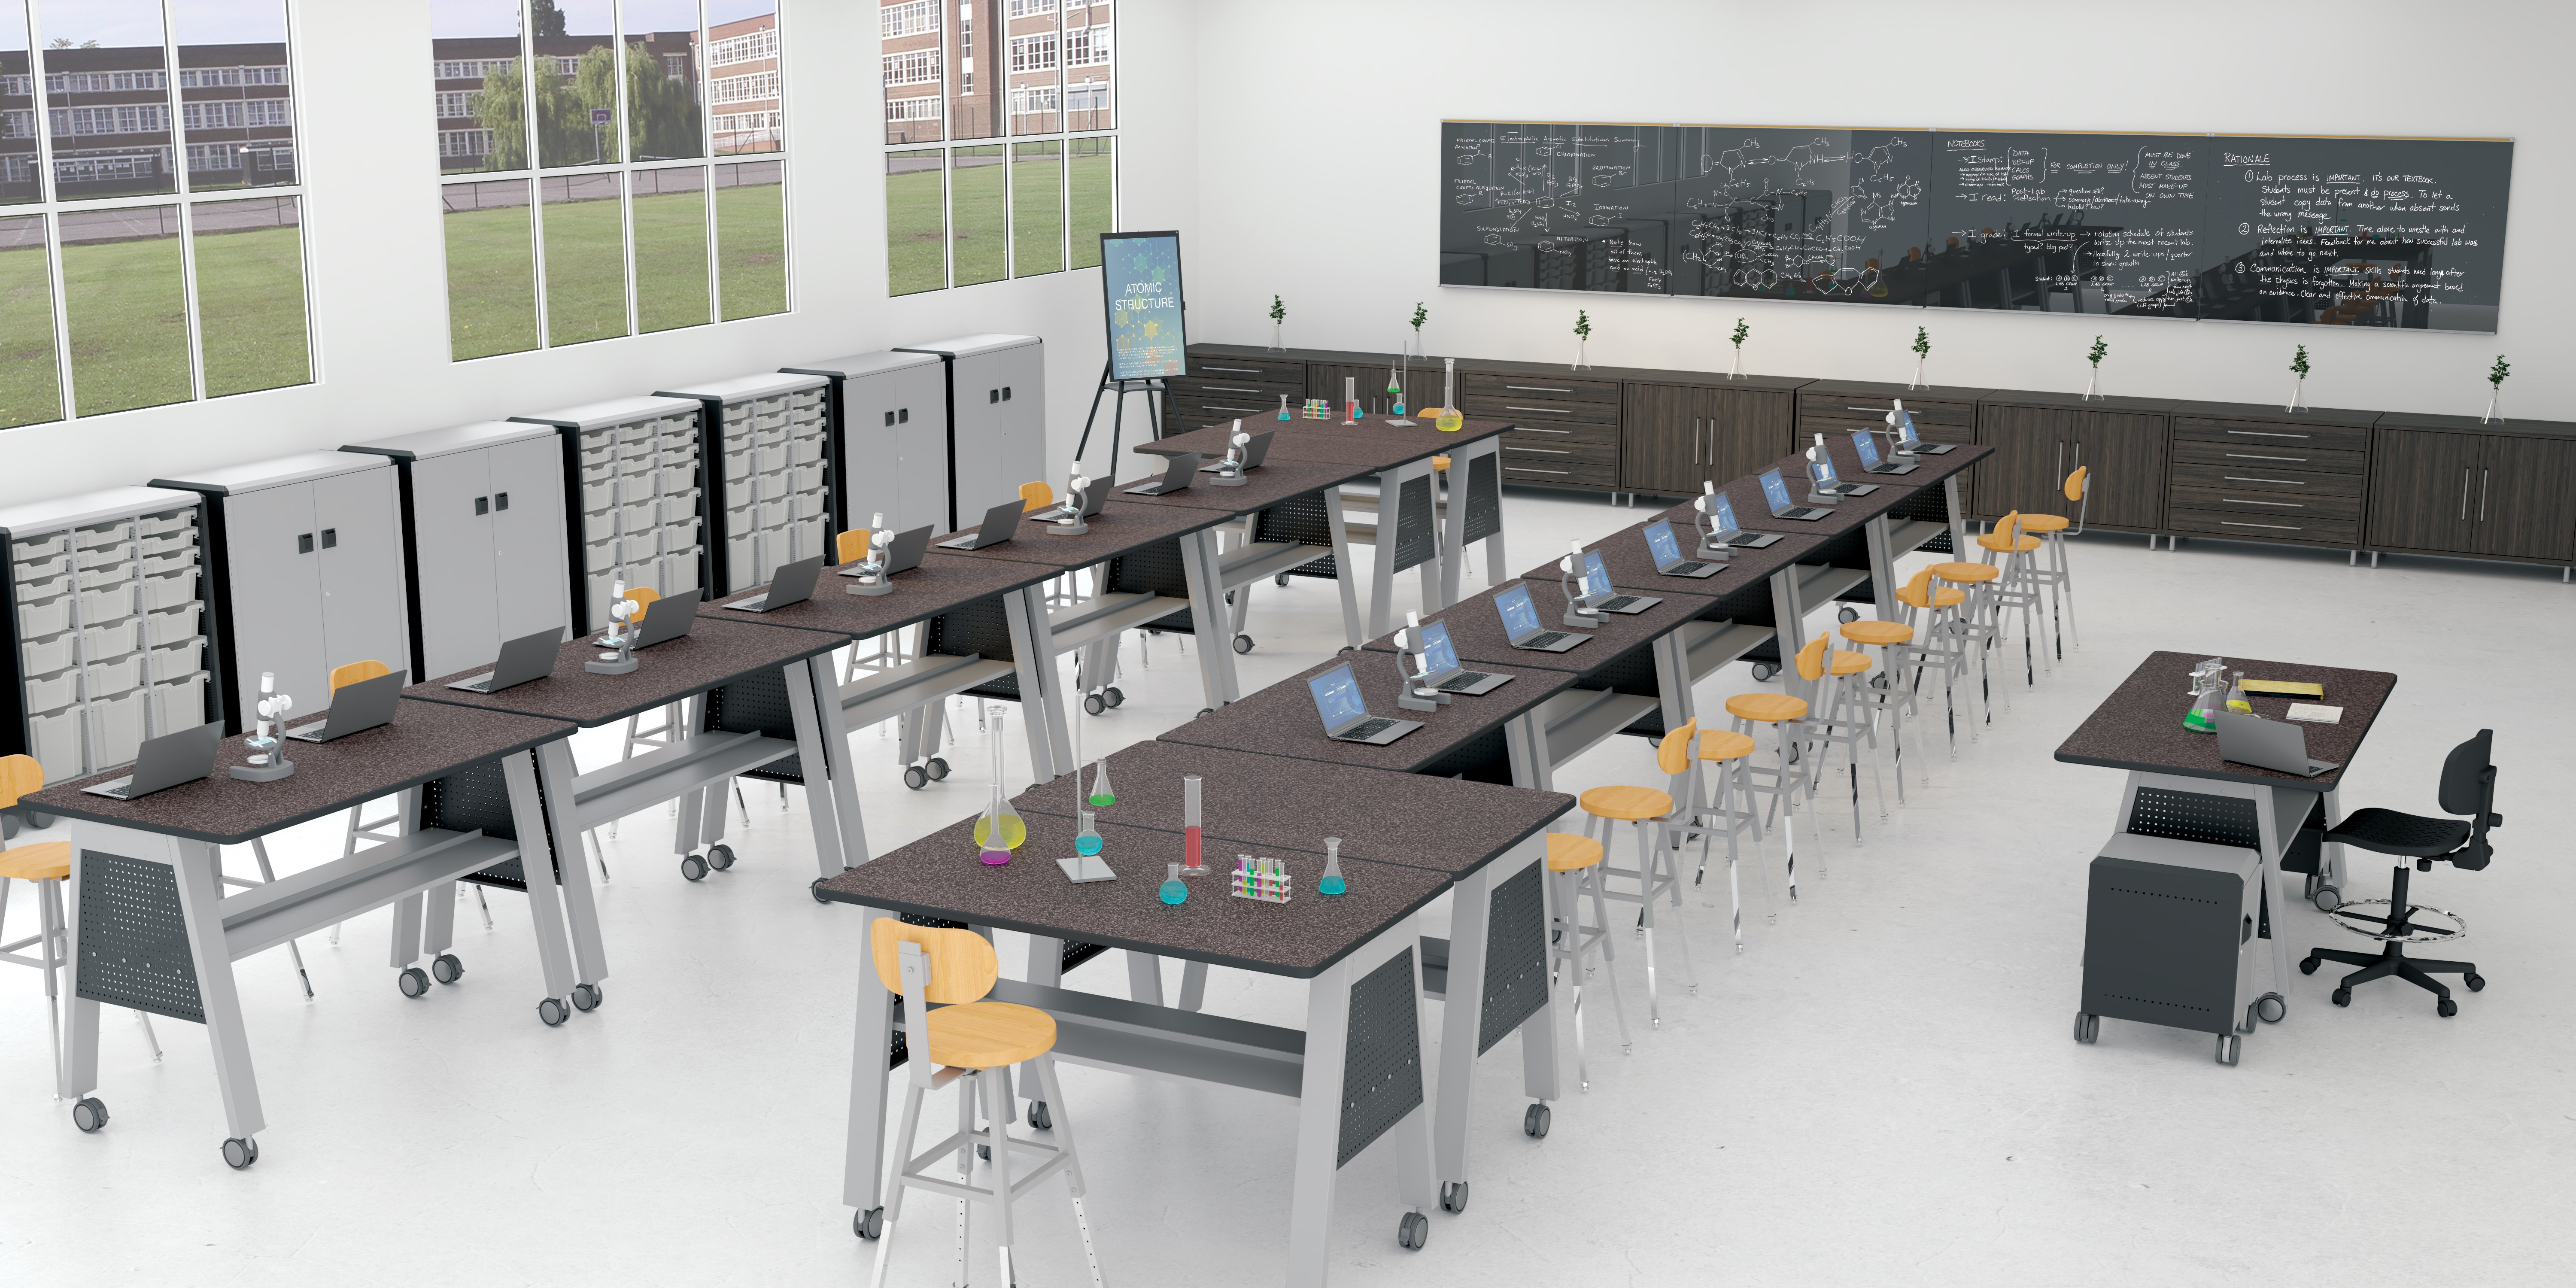 How to Incorporate CTE and Experiential Learning into Educational and Professional Workspaces